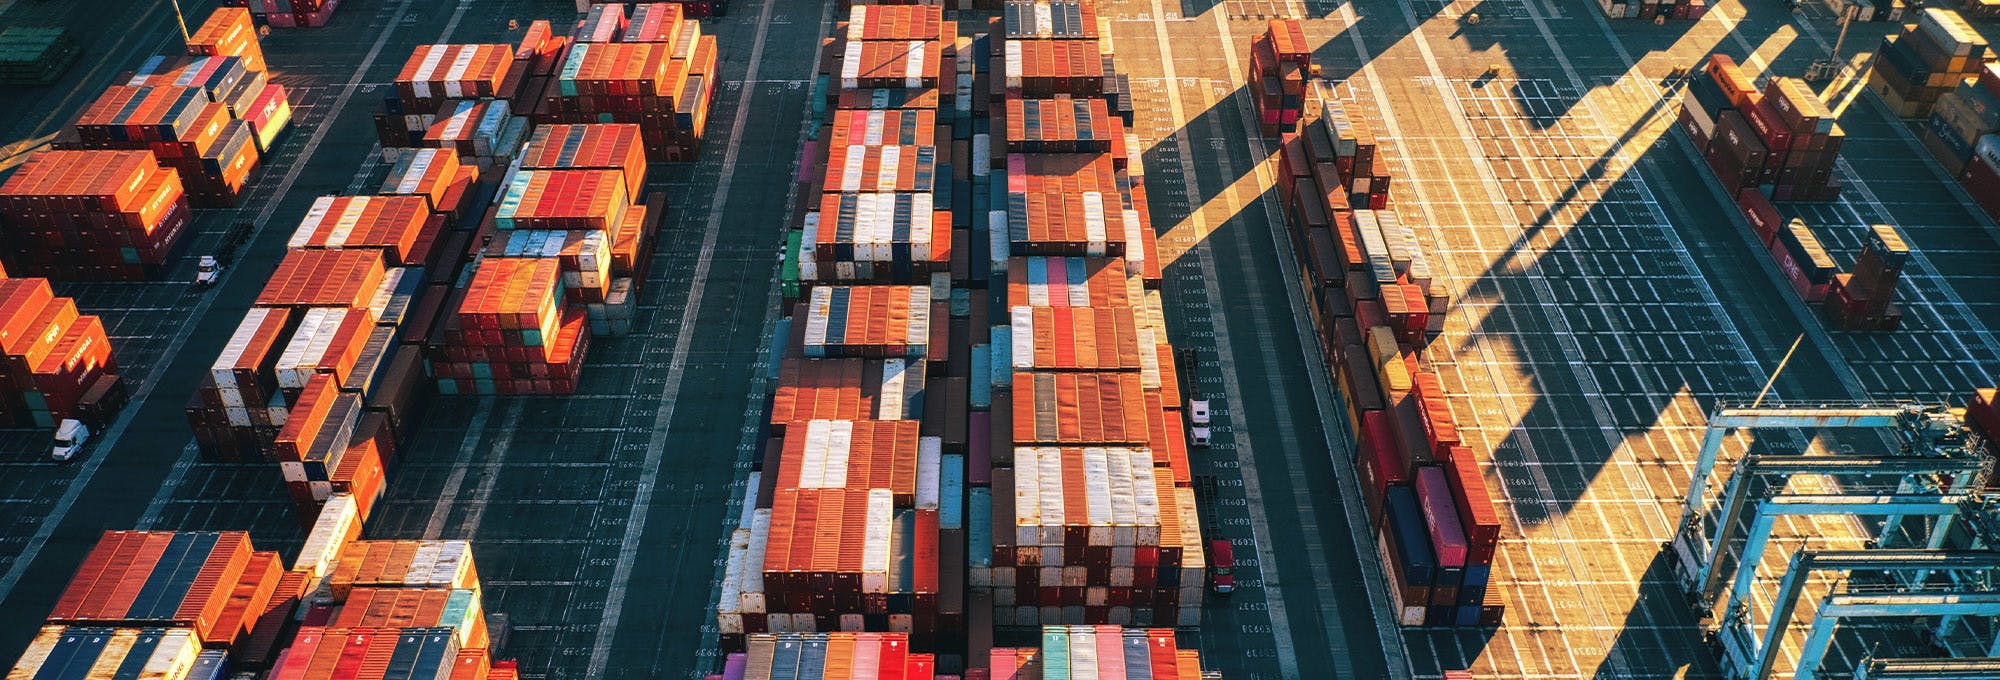 Overview of ship container yard with stacked containers. This helps represent the three economic questions 